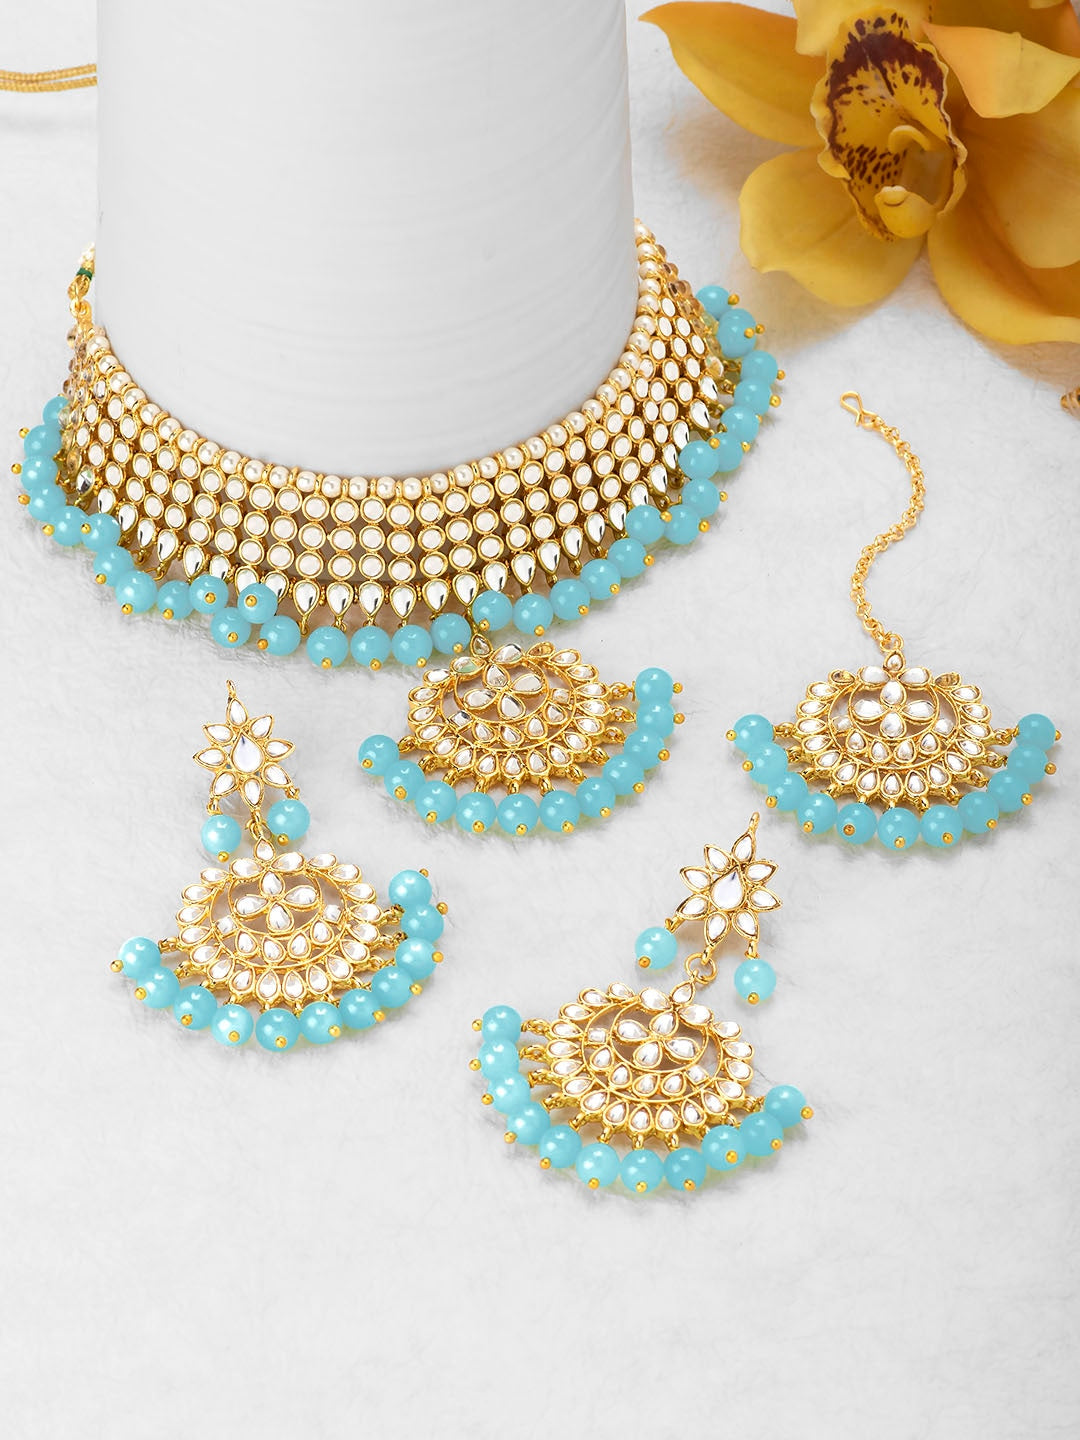 Gold Plated Pendant Sky Blue Choker Necklace Earrings Set Indian Jewellery